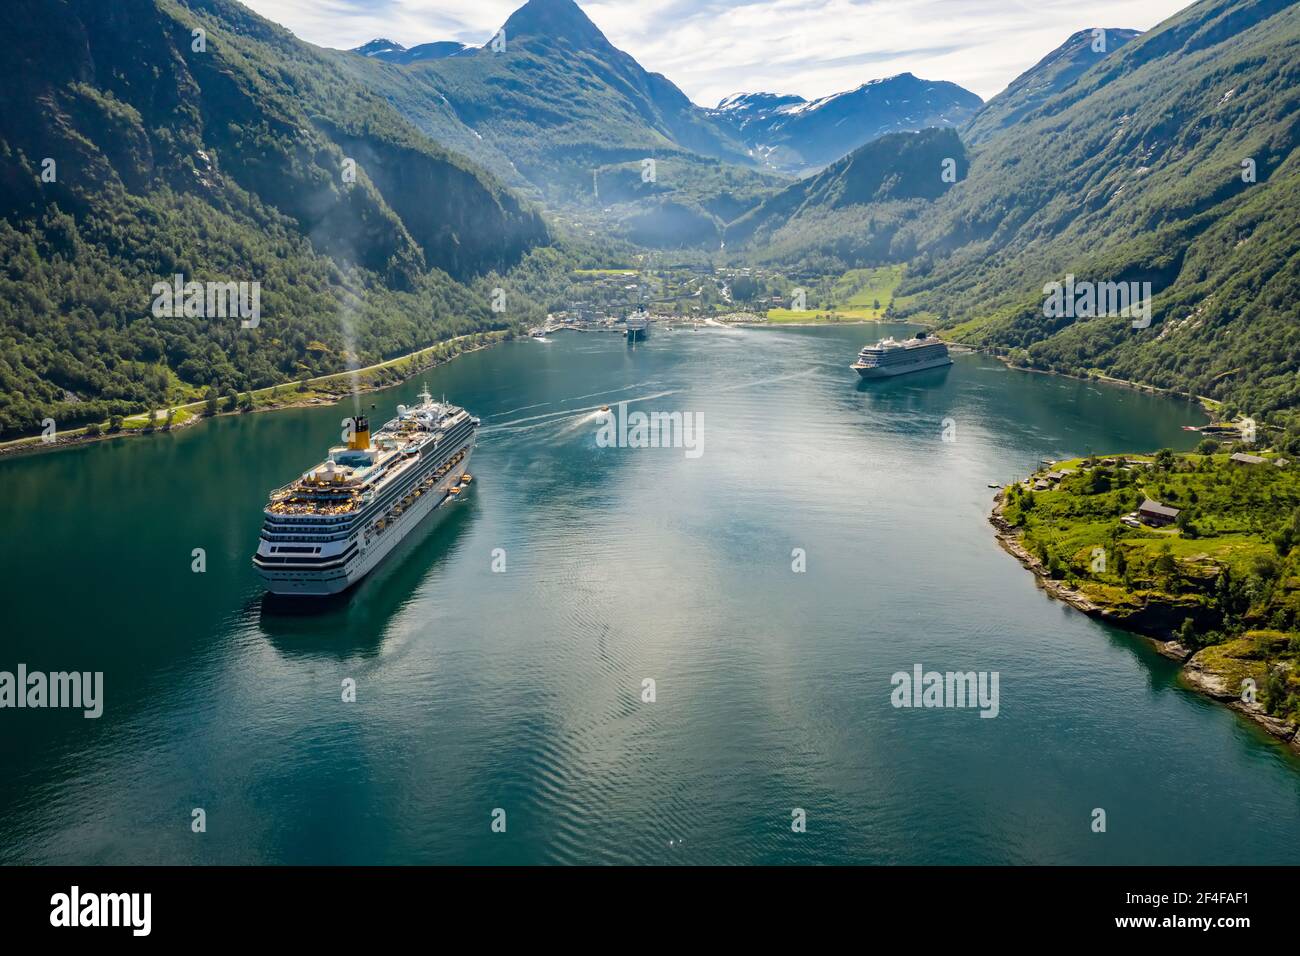 Geiranger fjord, Beautiful Nature Norway. The fjord is one of Norway's most visited tourist sites. Geiranger Fjord, a UNESCO World Heritage Site Stock Photo